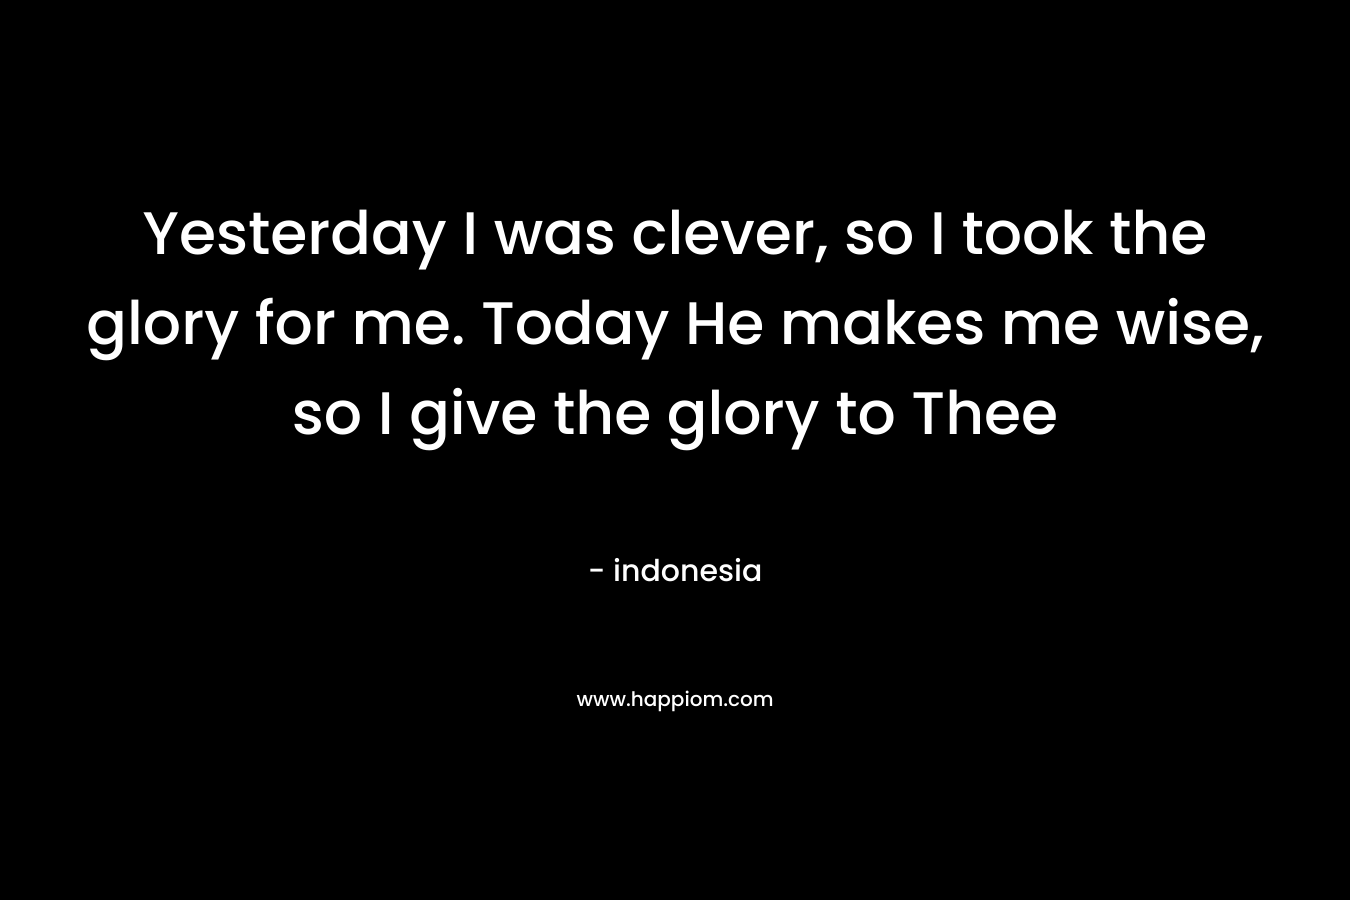 Yesterday I was clever, so I took the glory for me. Today He makes me wise, so I give the glory to Thee